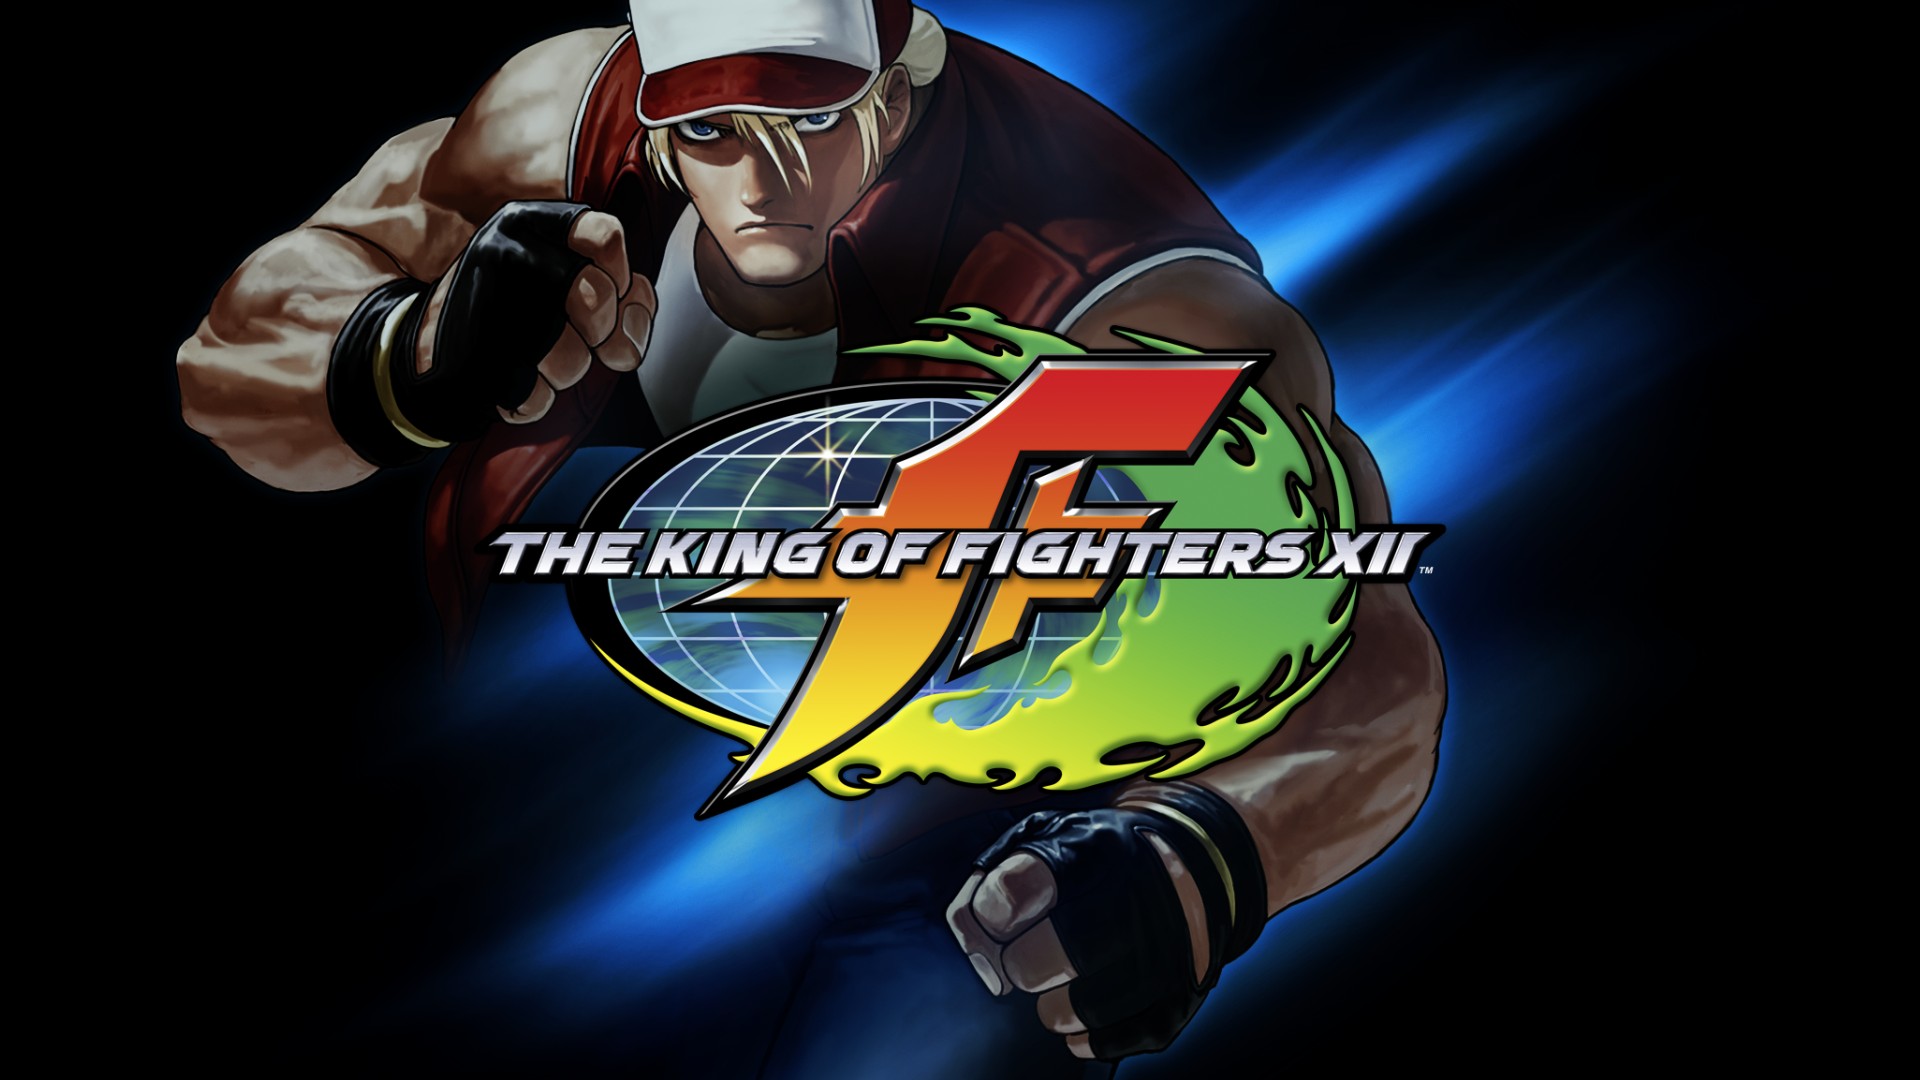 Video Game The King of Fighters XII HD Wallpaper | Background Image